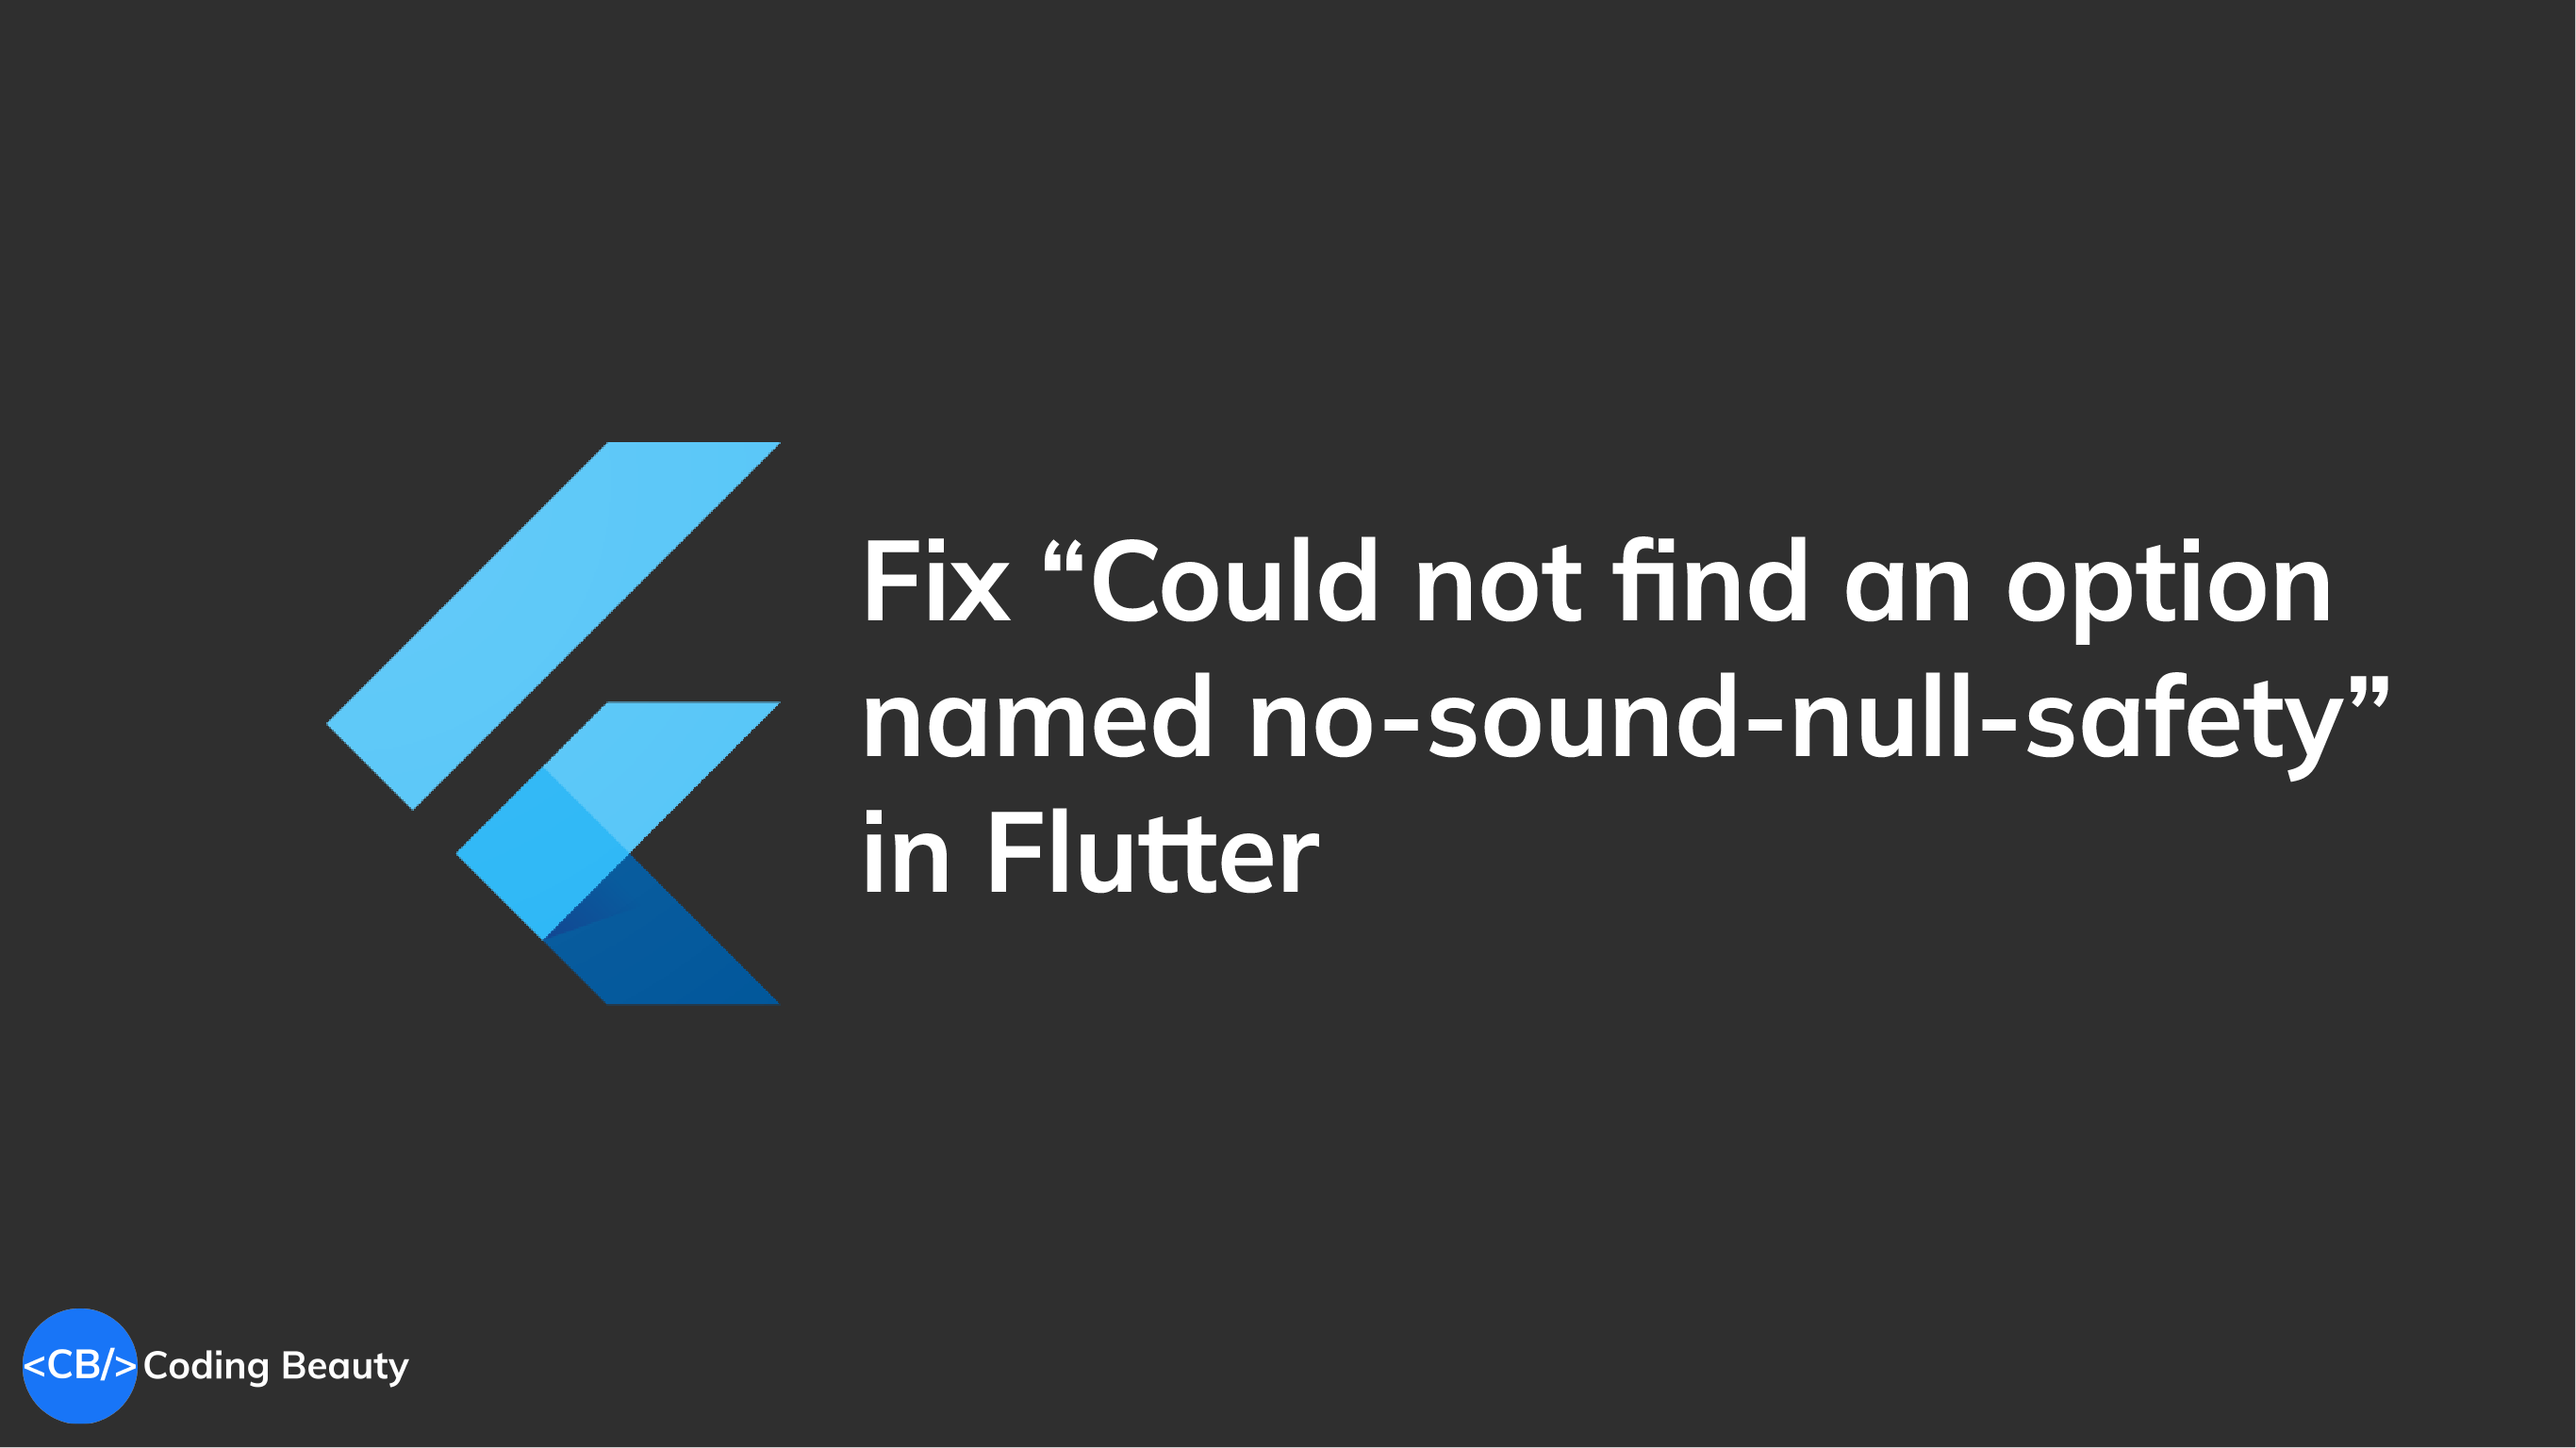 [SOLVED] Could not find an option named "no-sound-null-safety" in Flutter